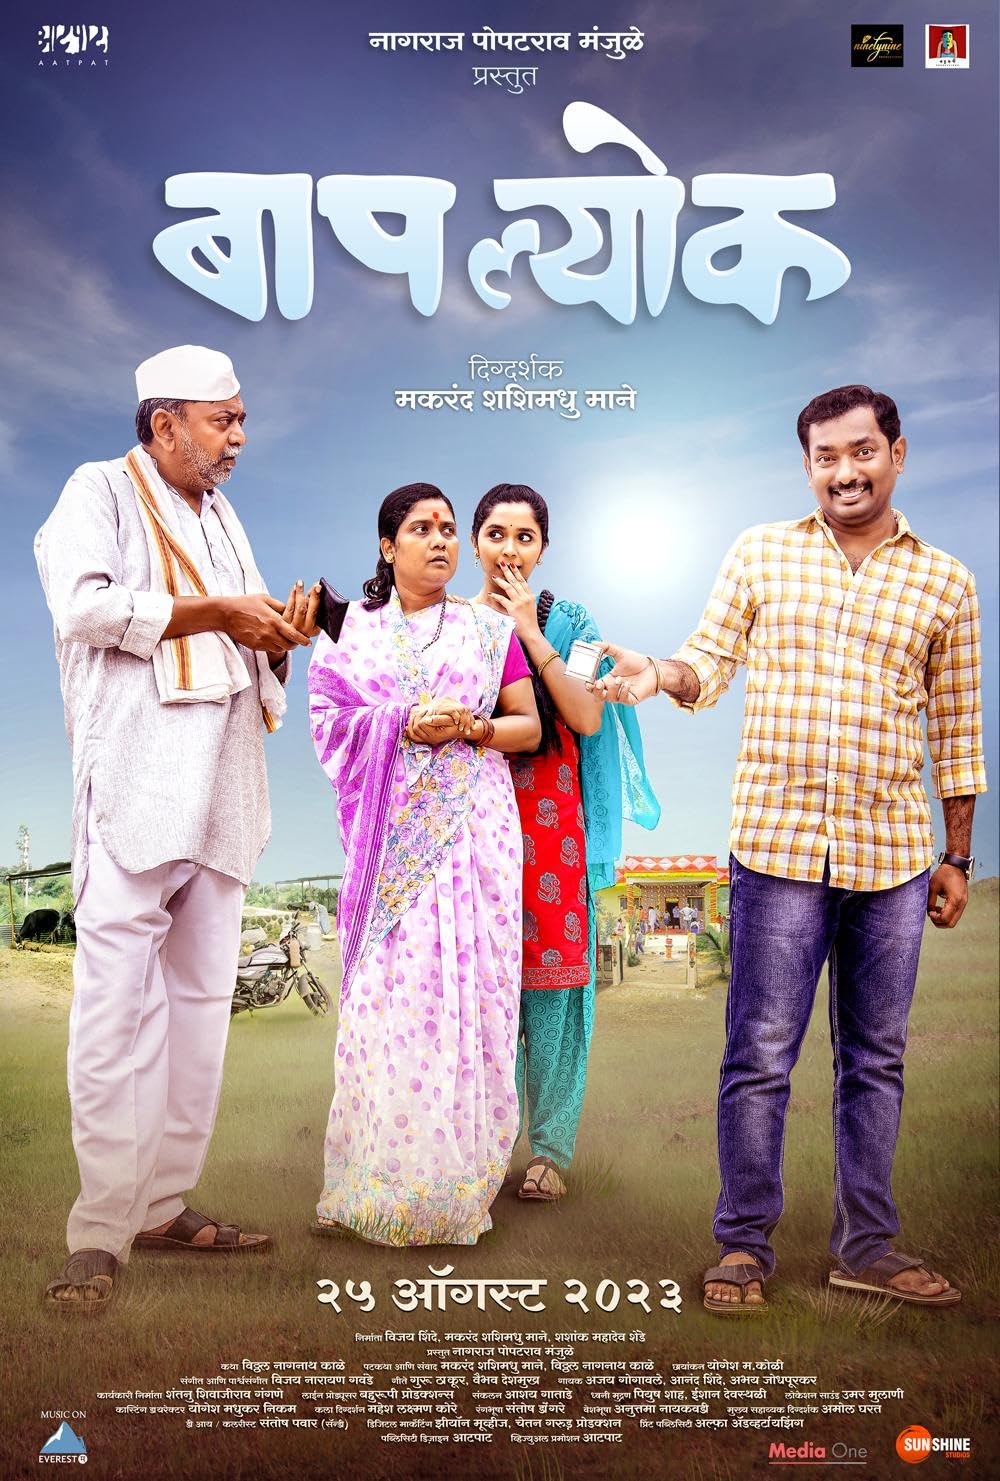 Baaplyok full cast and crew - Check here the Baaplyok Marathi 2023 wiki, release date, wikipedia poster, trailer, Budget, Hit or Flop, Worldwide Box Office Collection.